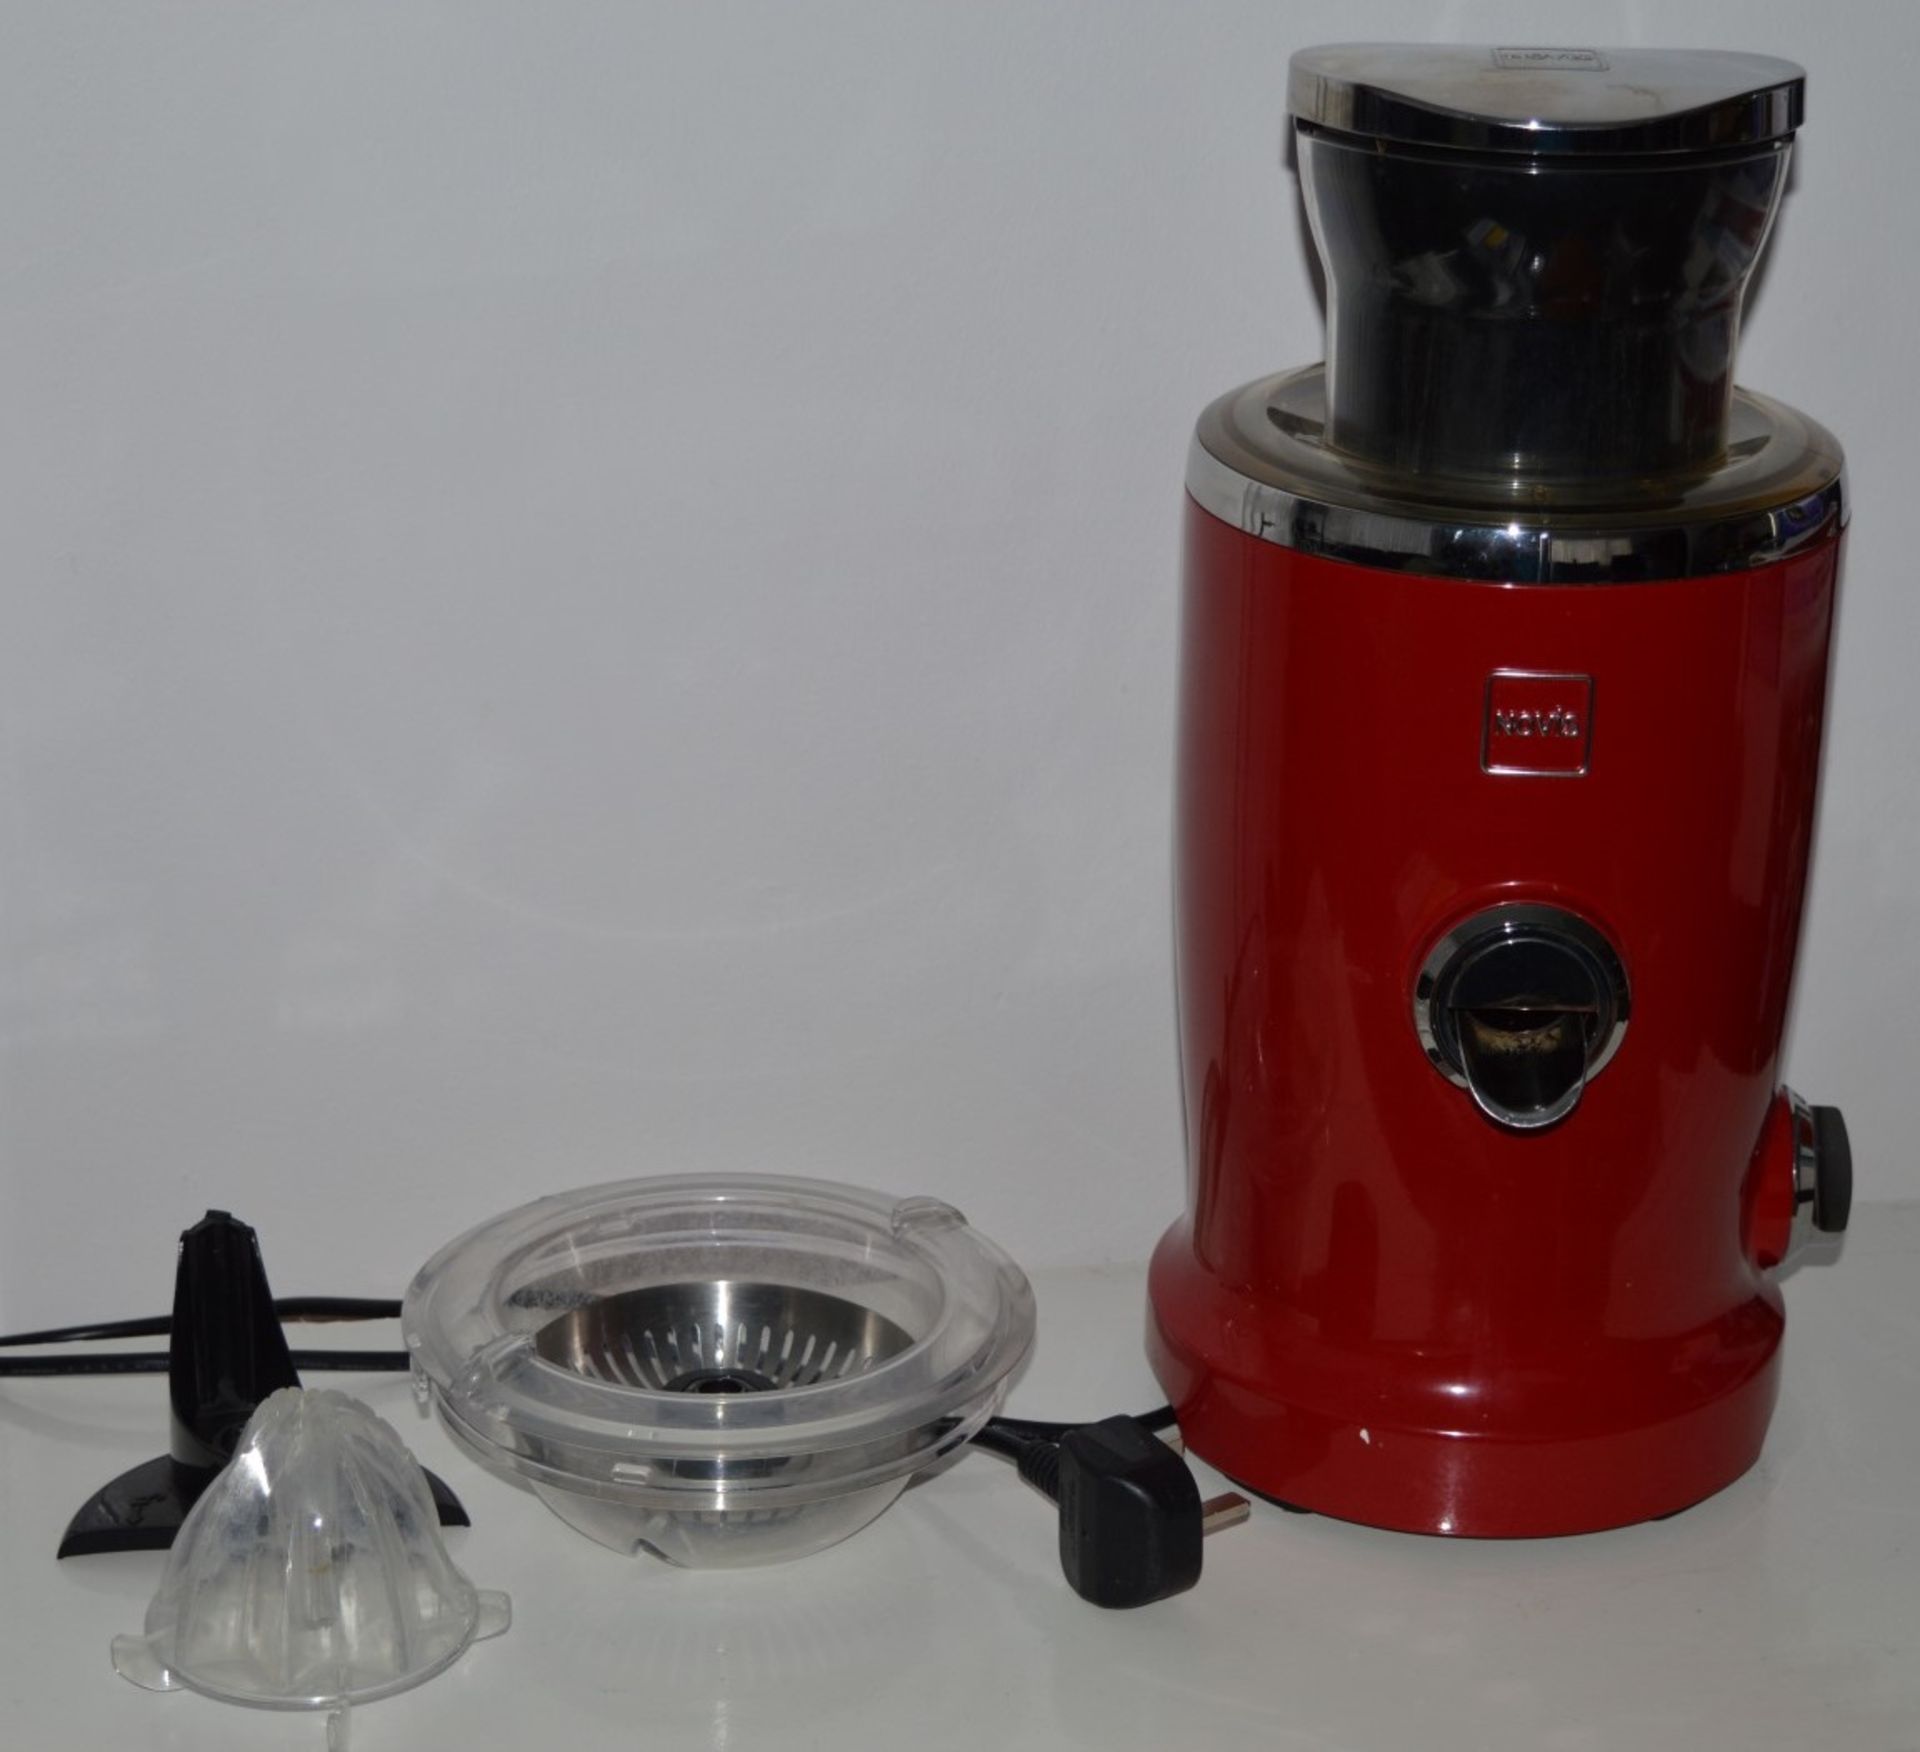 1 x Novis Vita Juice Blender in Red - Made in Switzerkabd For a Natural Healthy Life Style - With - Image 3 of 8